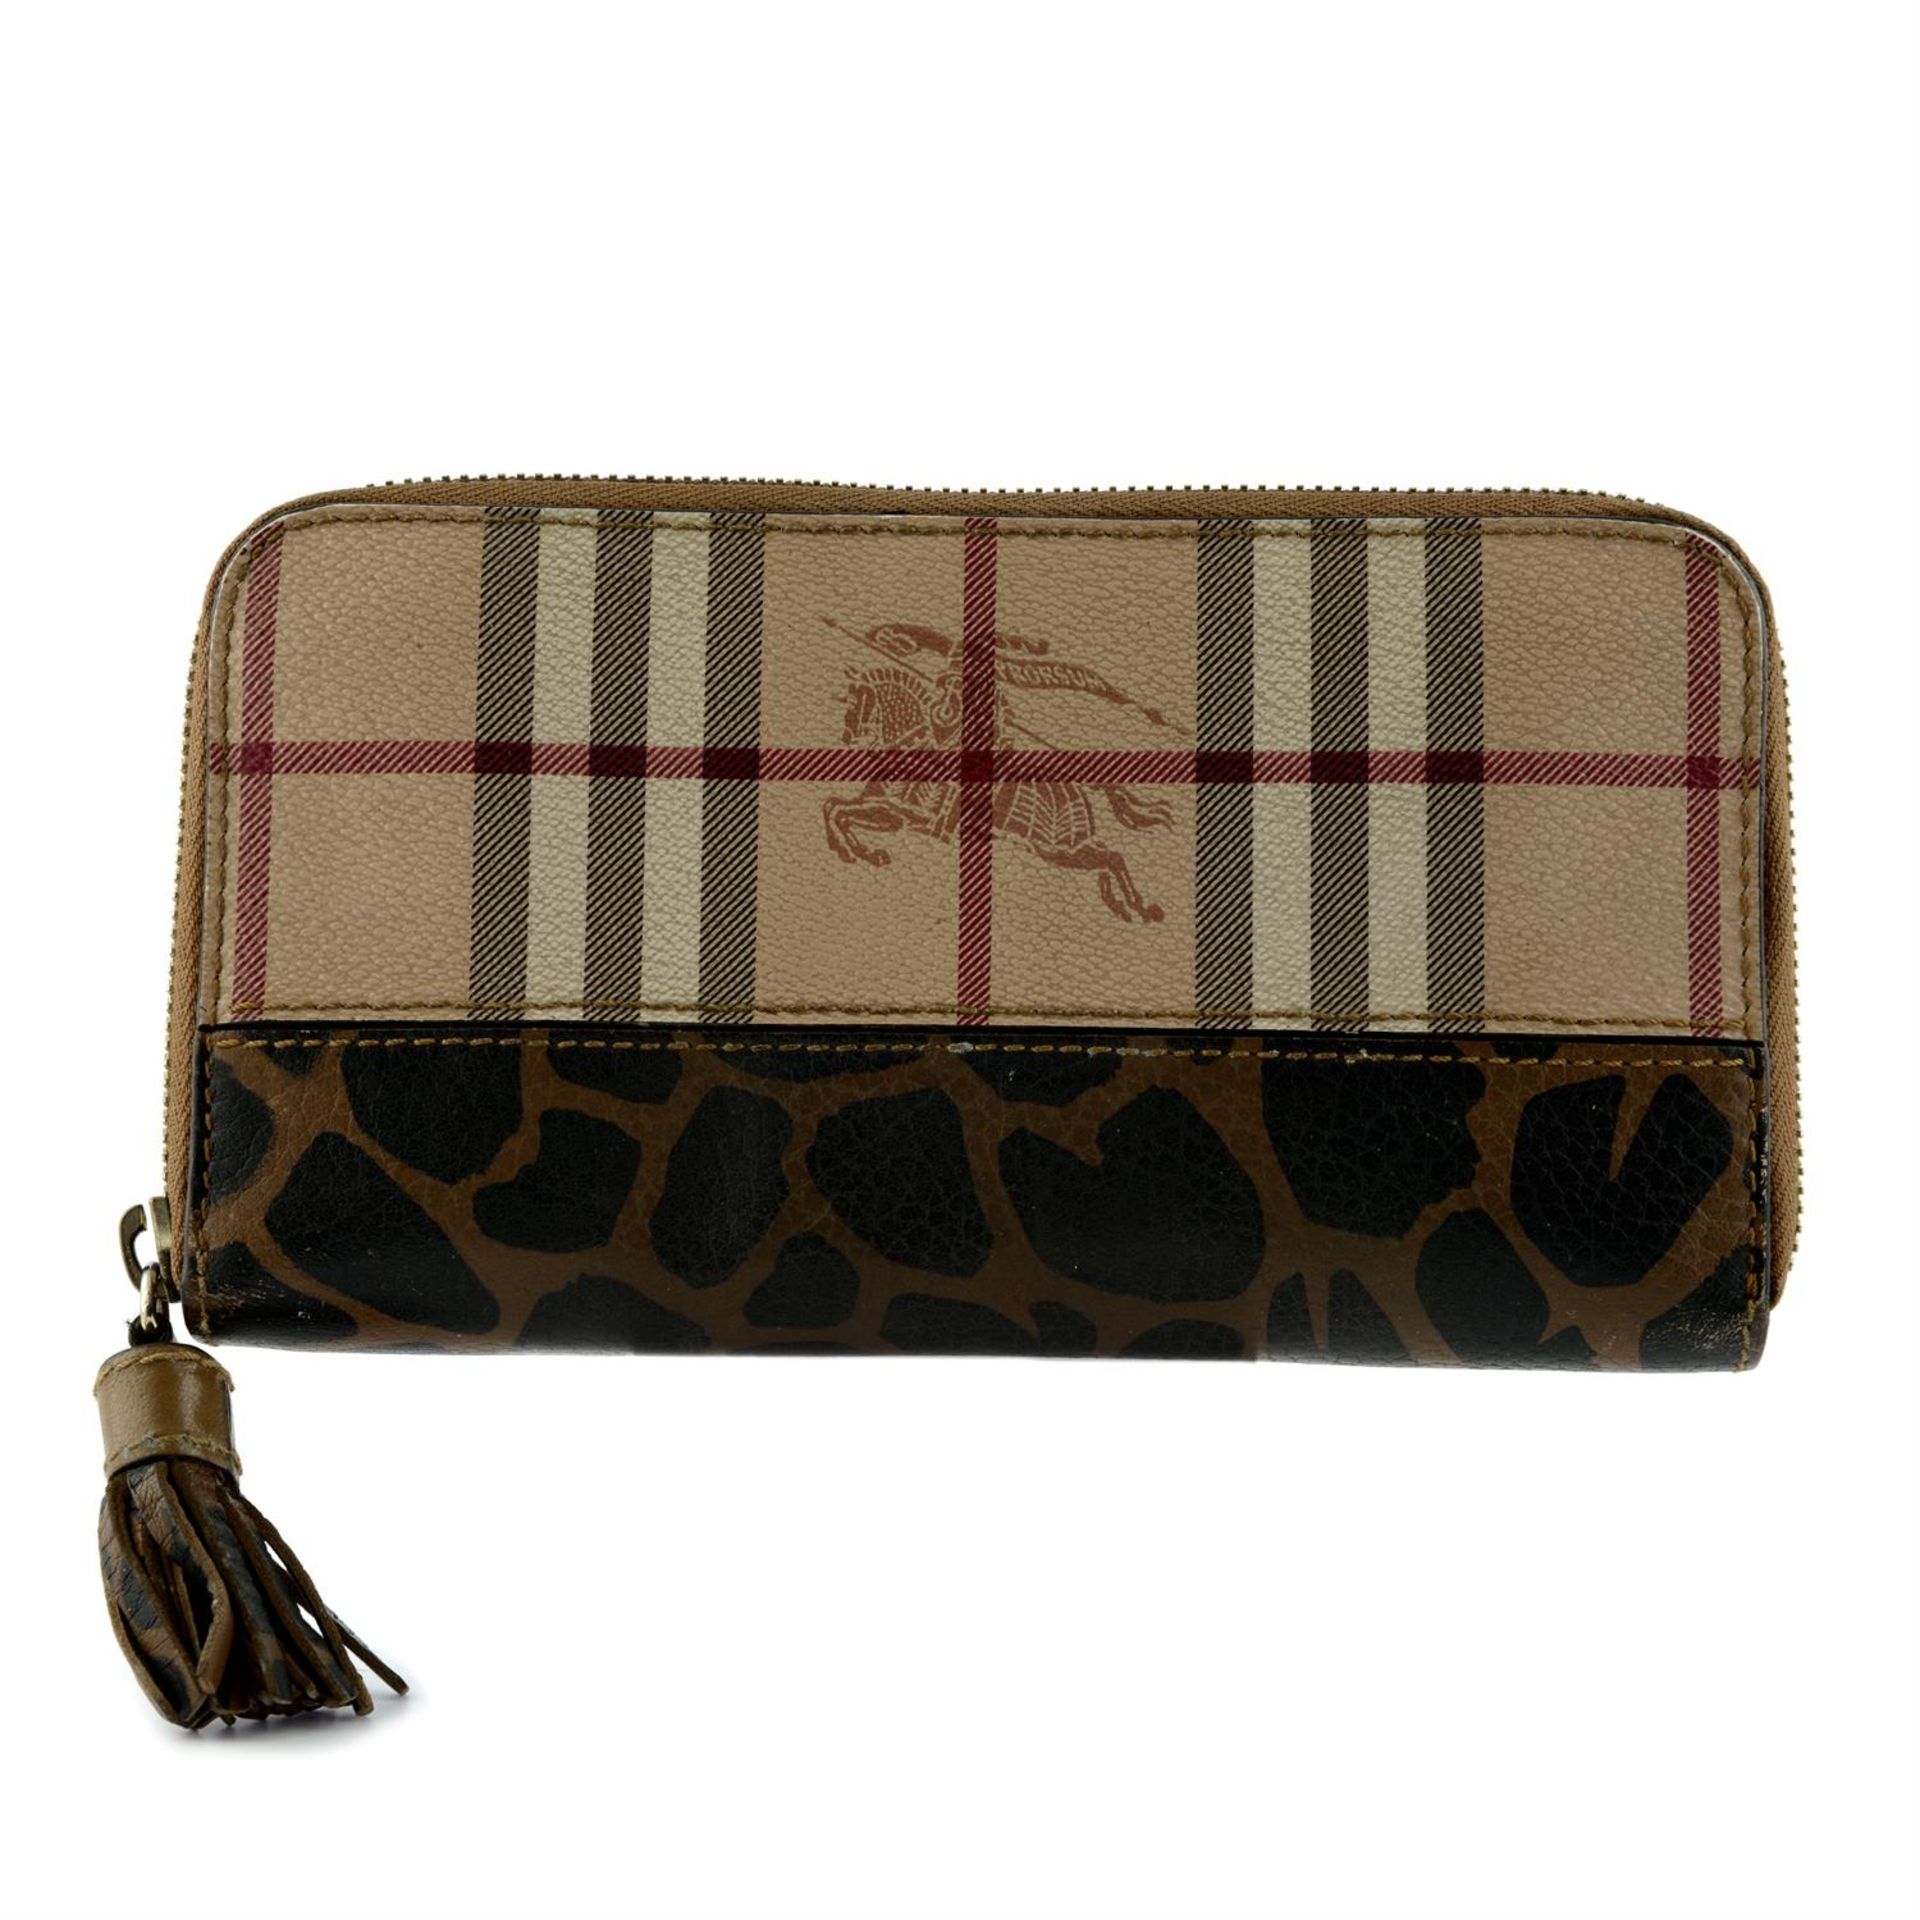 BURBERRY - A Horseferry check and leopard print leather zippy wallet.